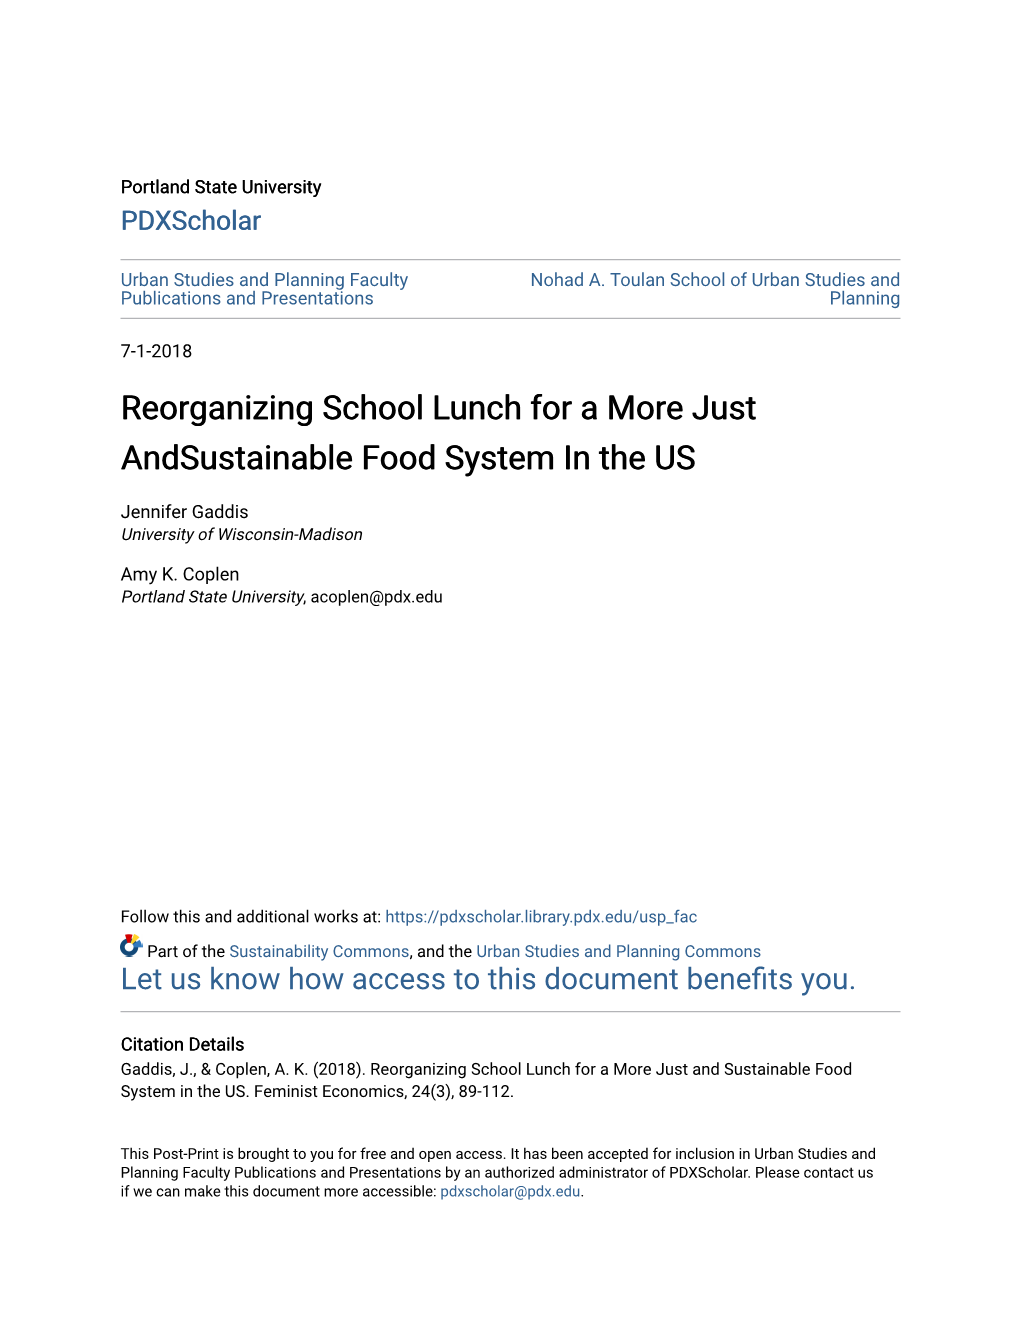 Reorganizing School Lunch for a More Just Andsustainable Food System in the US